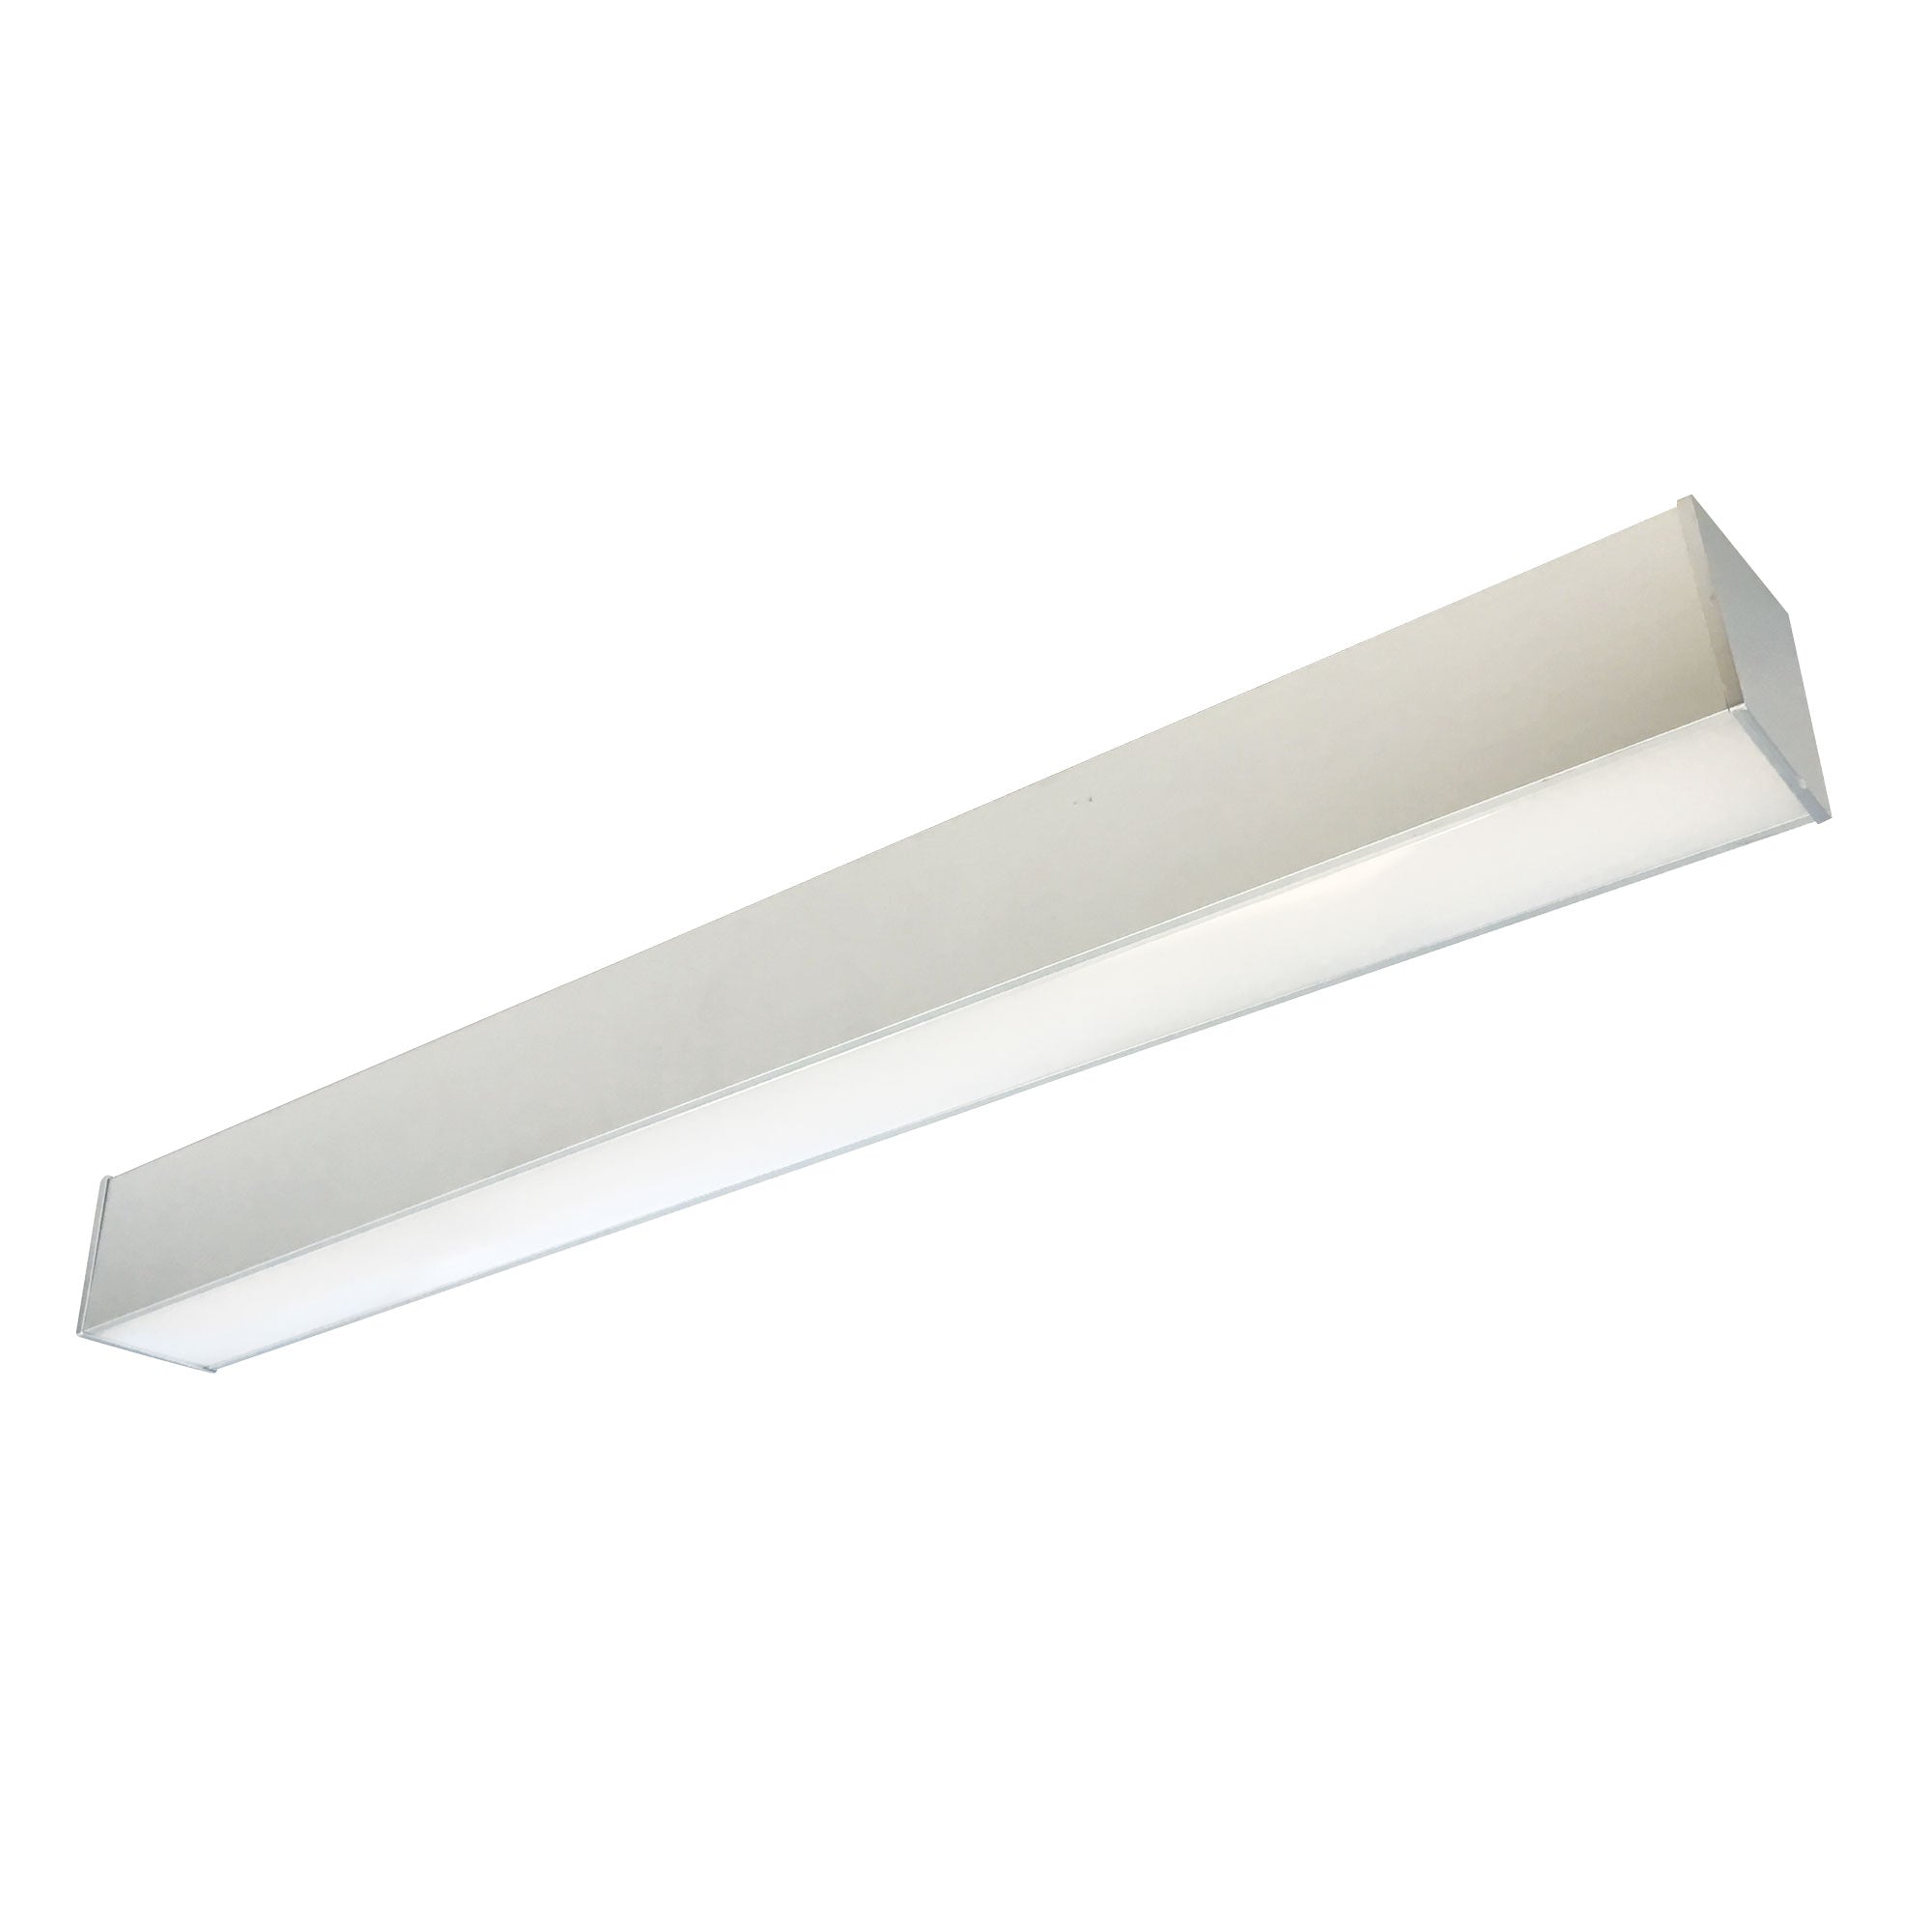 Nora Lighting NLIN-81035A/A - Linear - 8' L-Line LED Direct Linear w/ Dedicated CCT, 8400lm / 3500K, Aluminum Finish